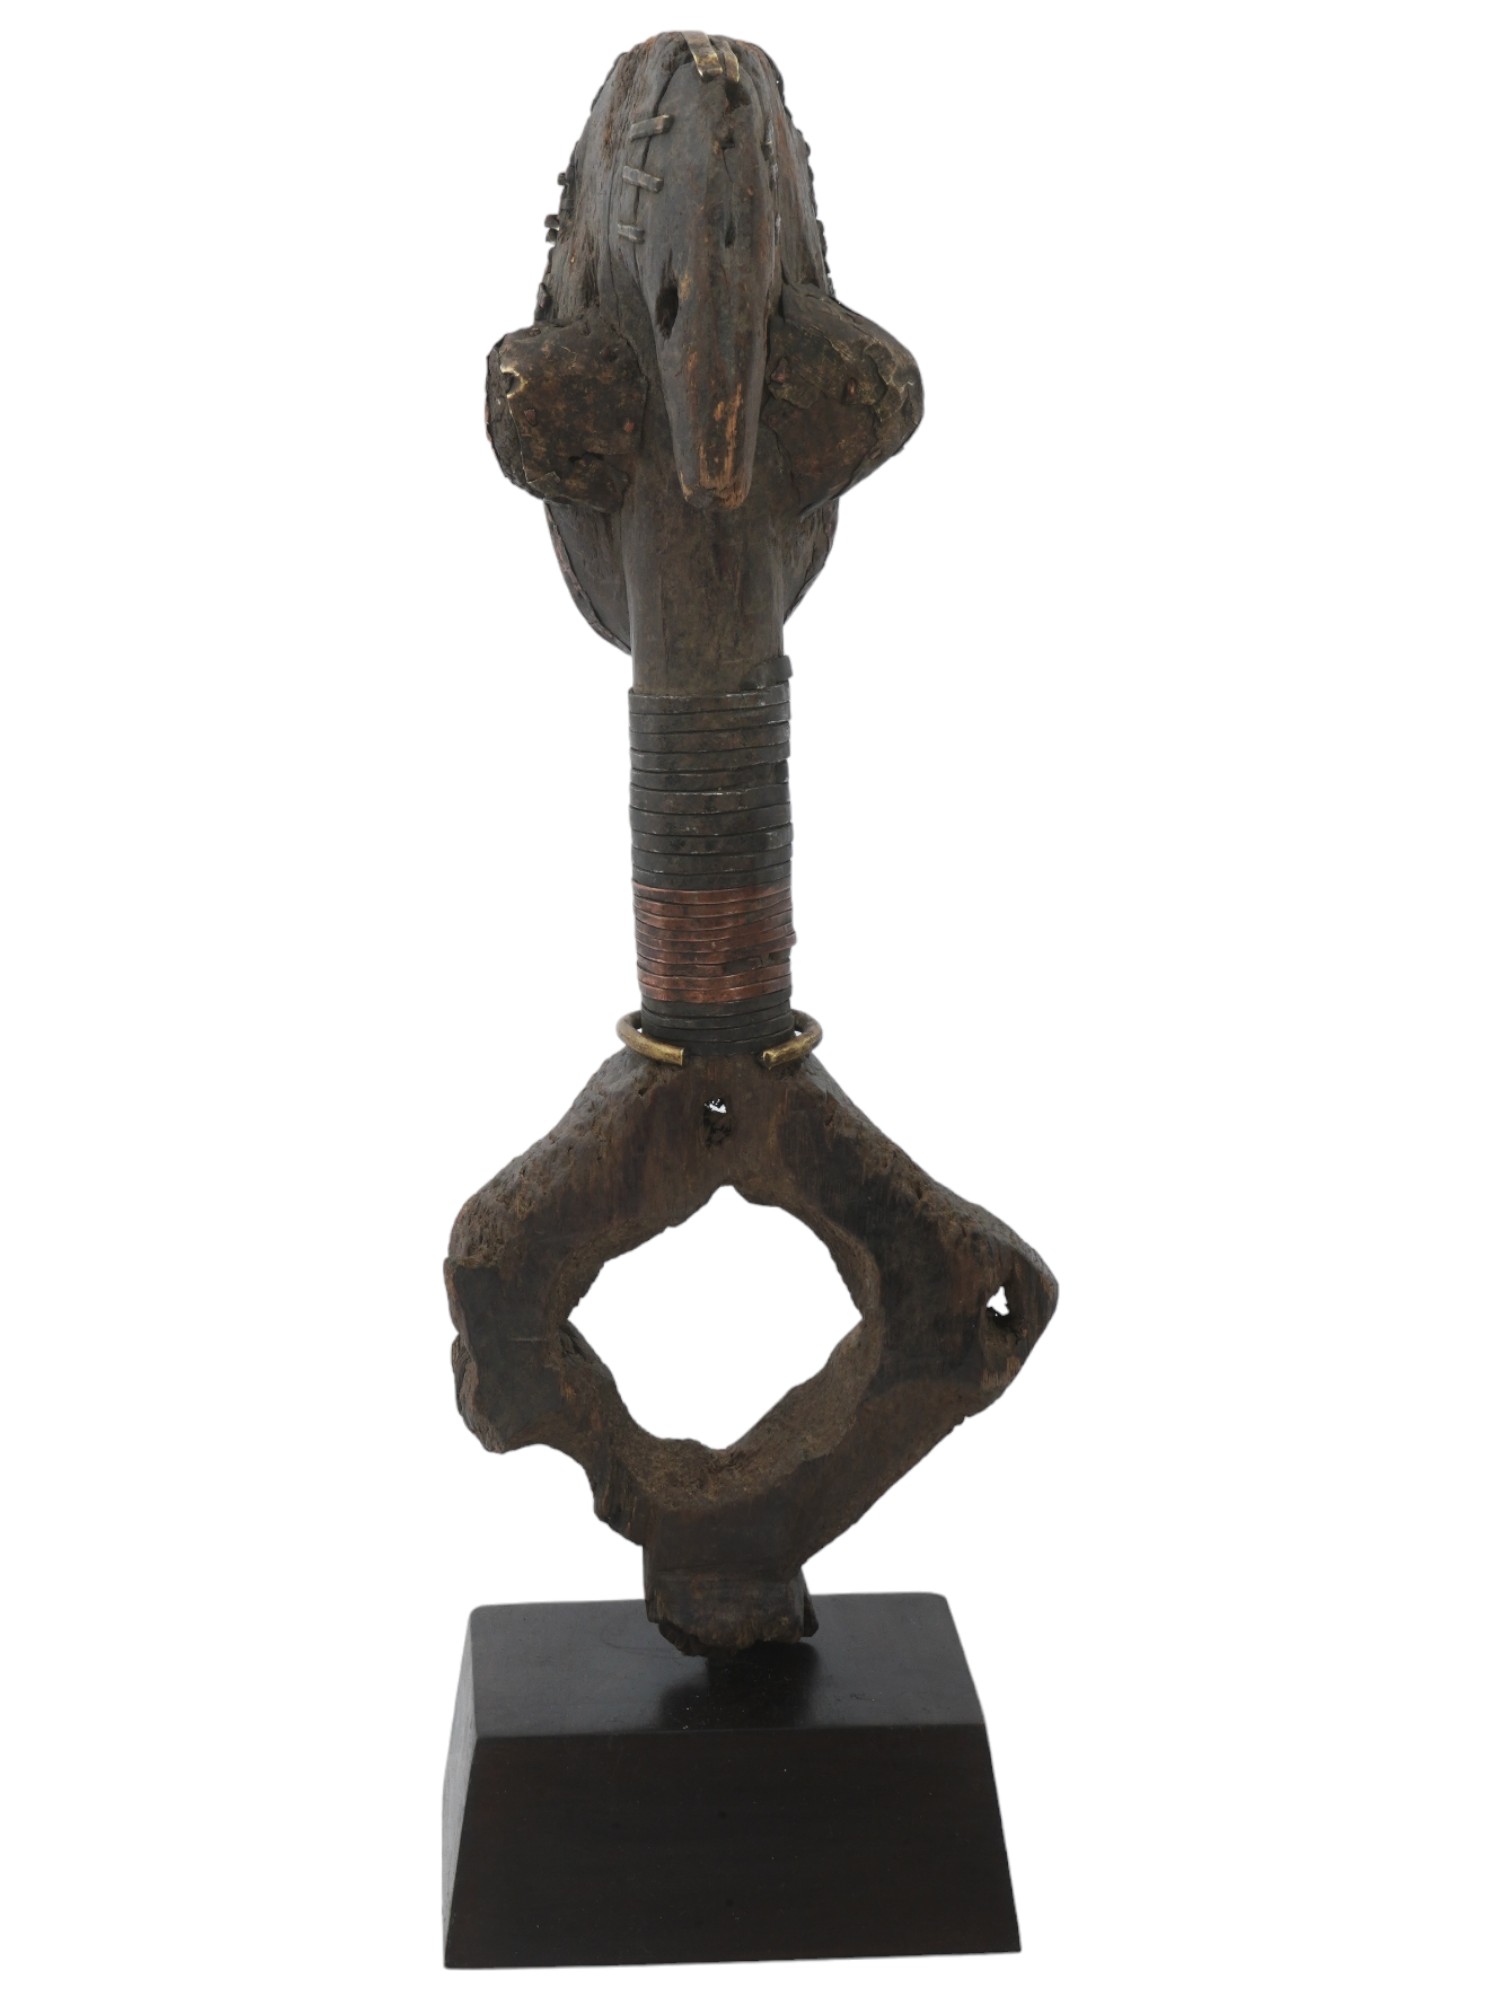 AFRICAN KOTA PEOPLES OBAMBA GUARDIAN RELIQUARY FIGURE PIC-2